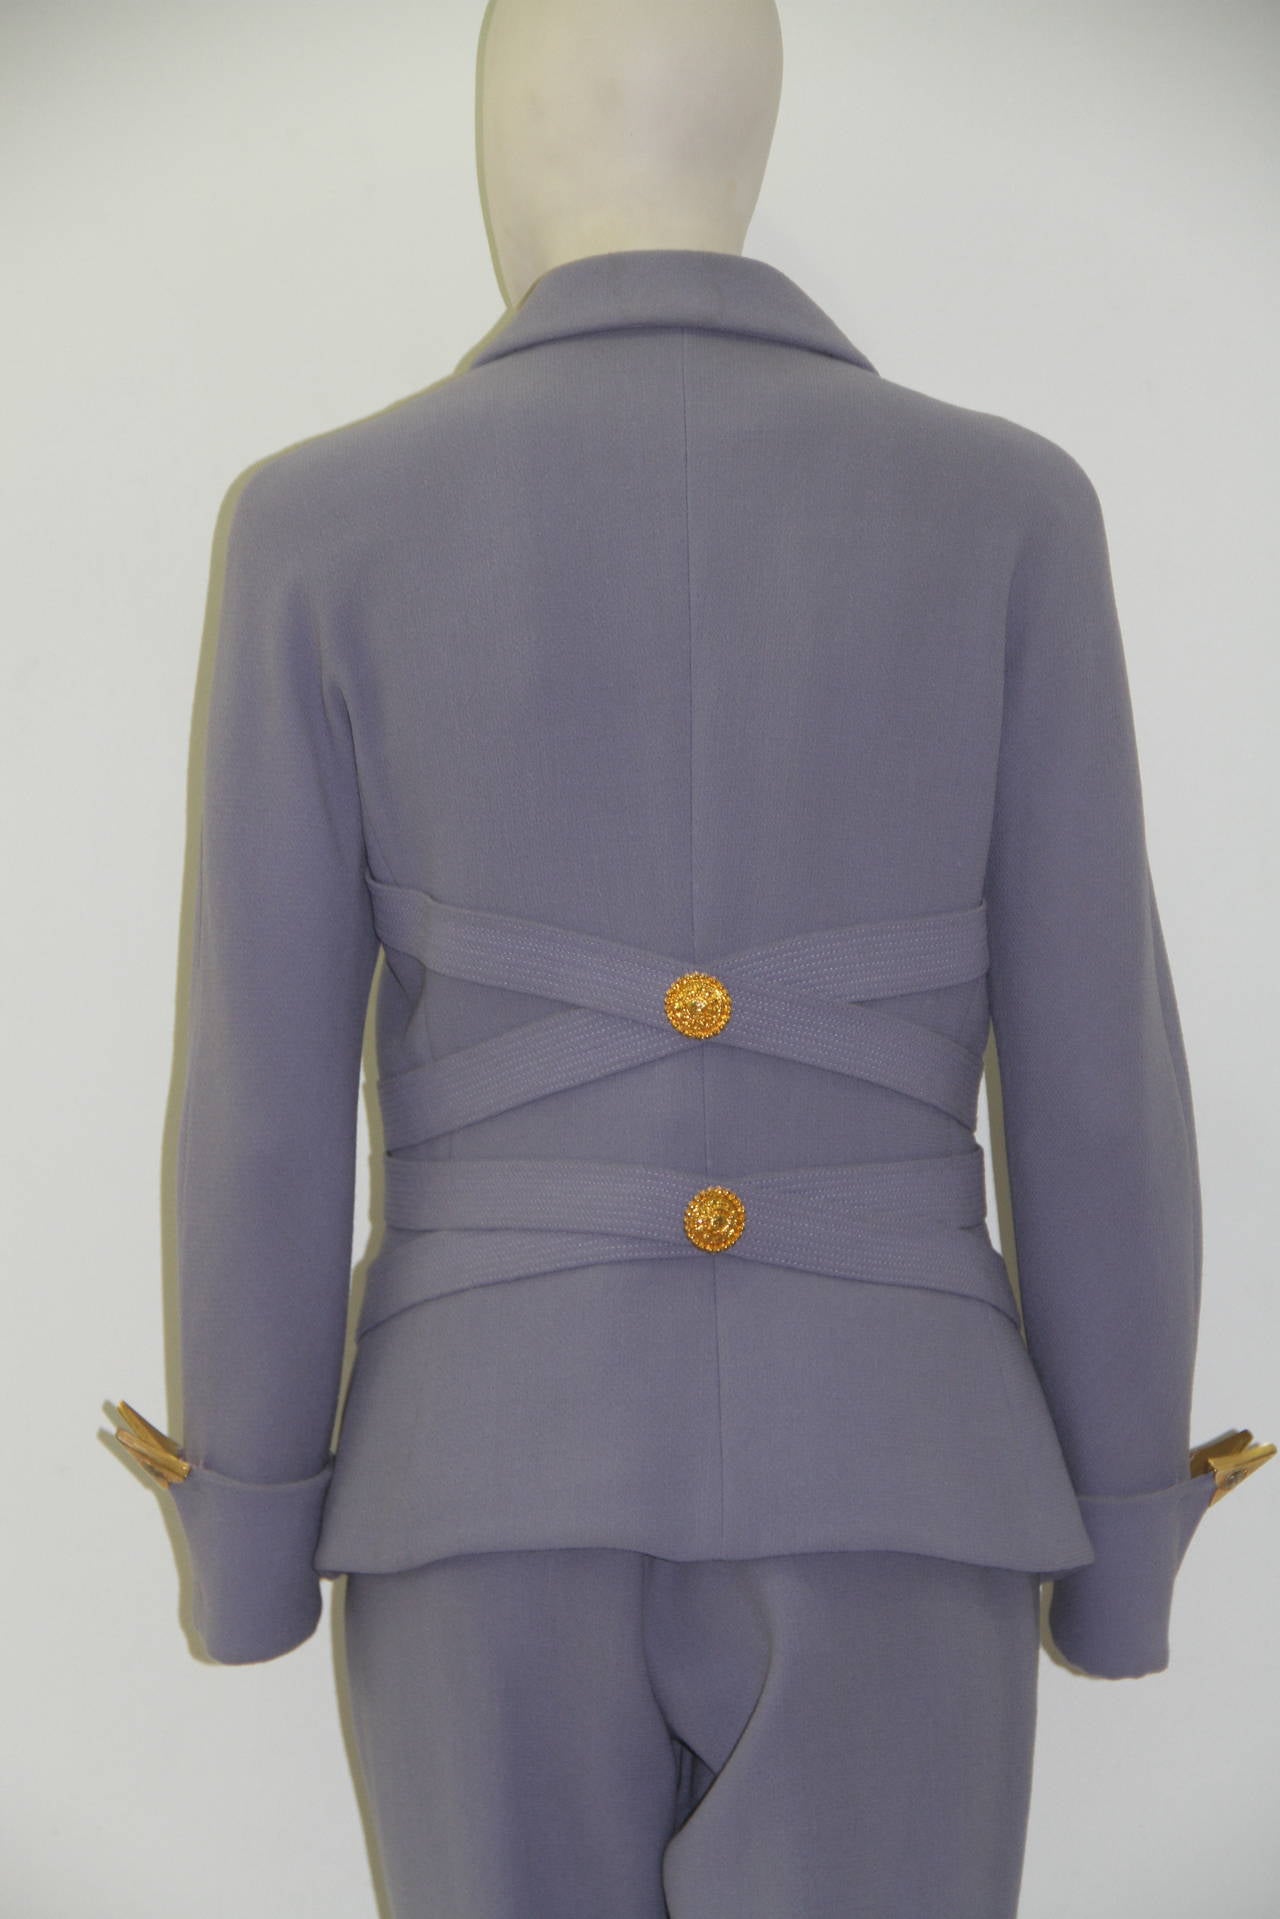 Gianni Versace Bondage Pant Suit Fall 1992 In New Condition For Sale In W1, GB